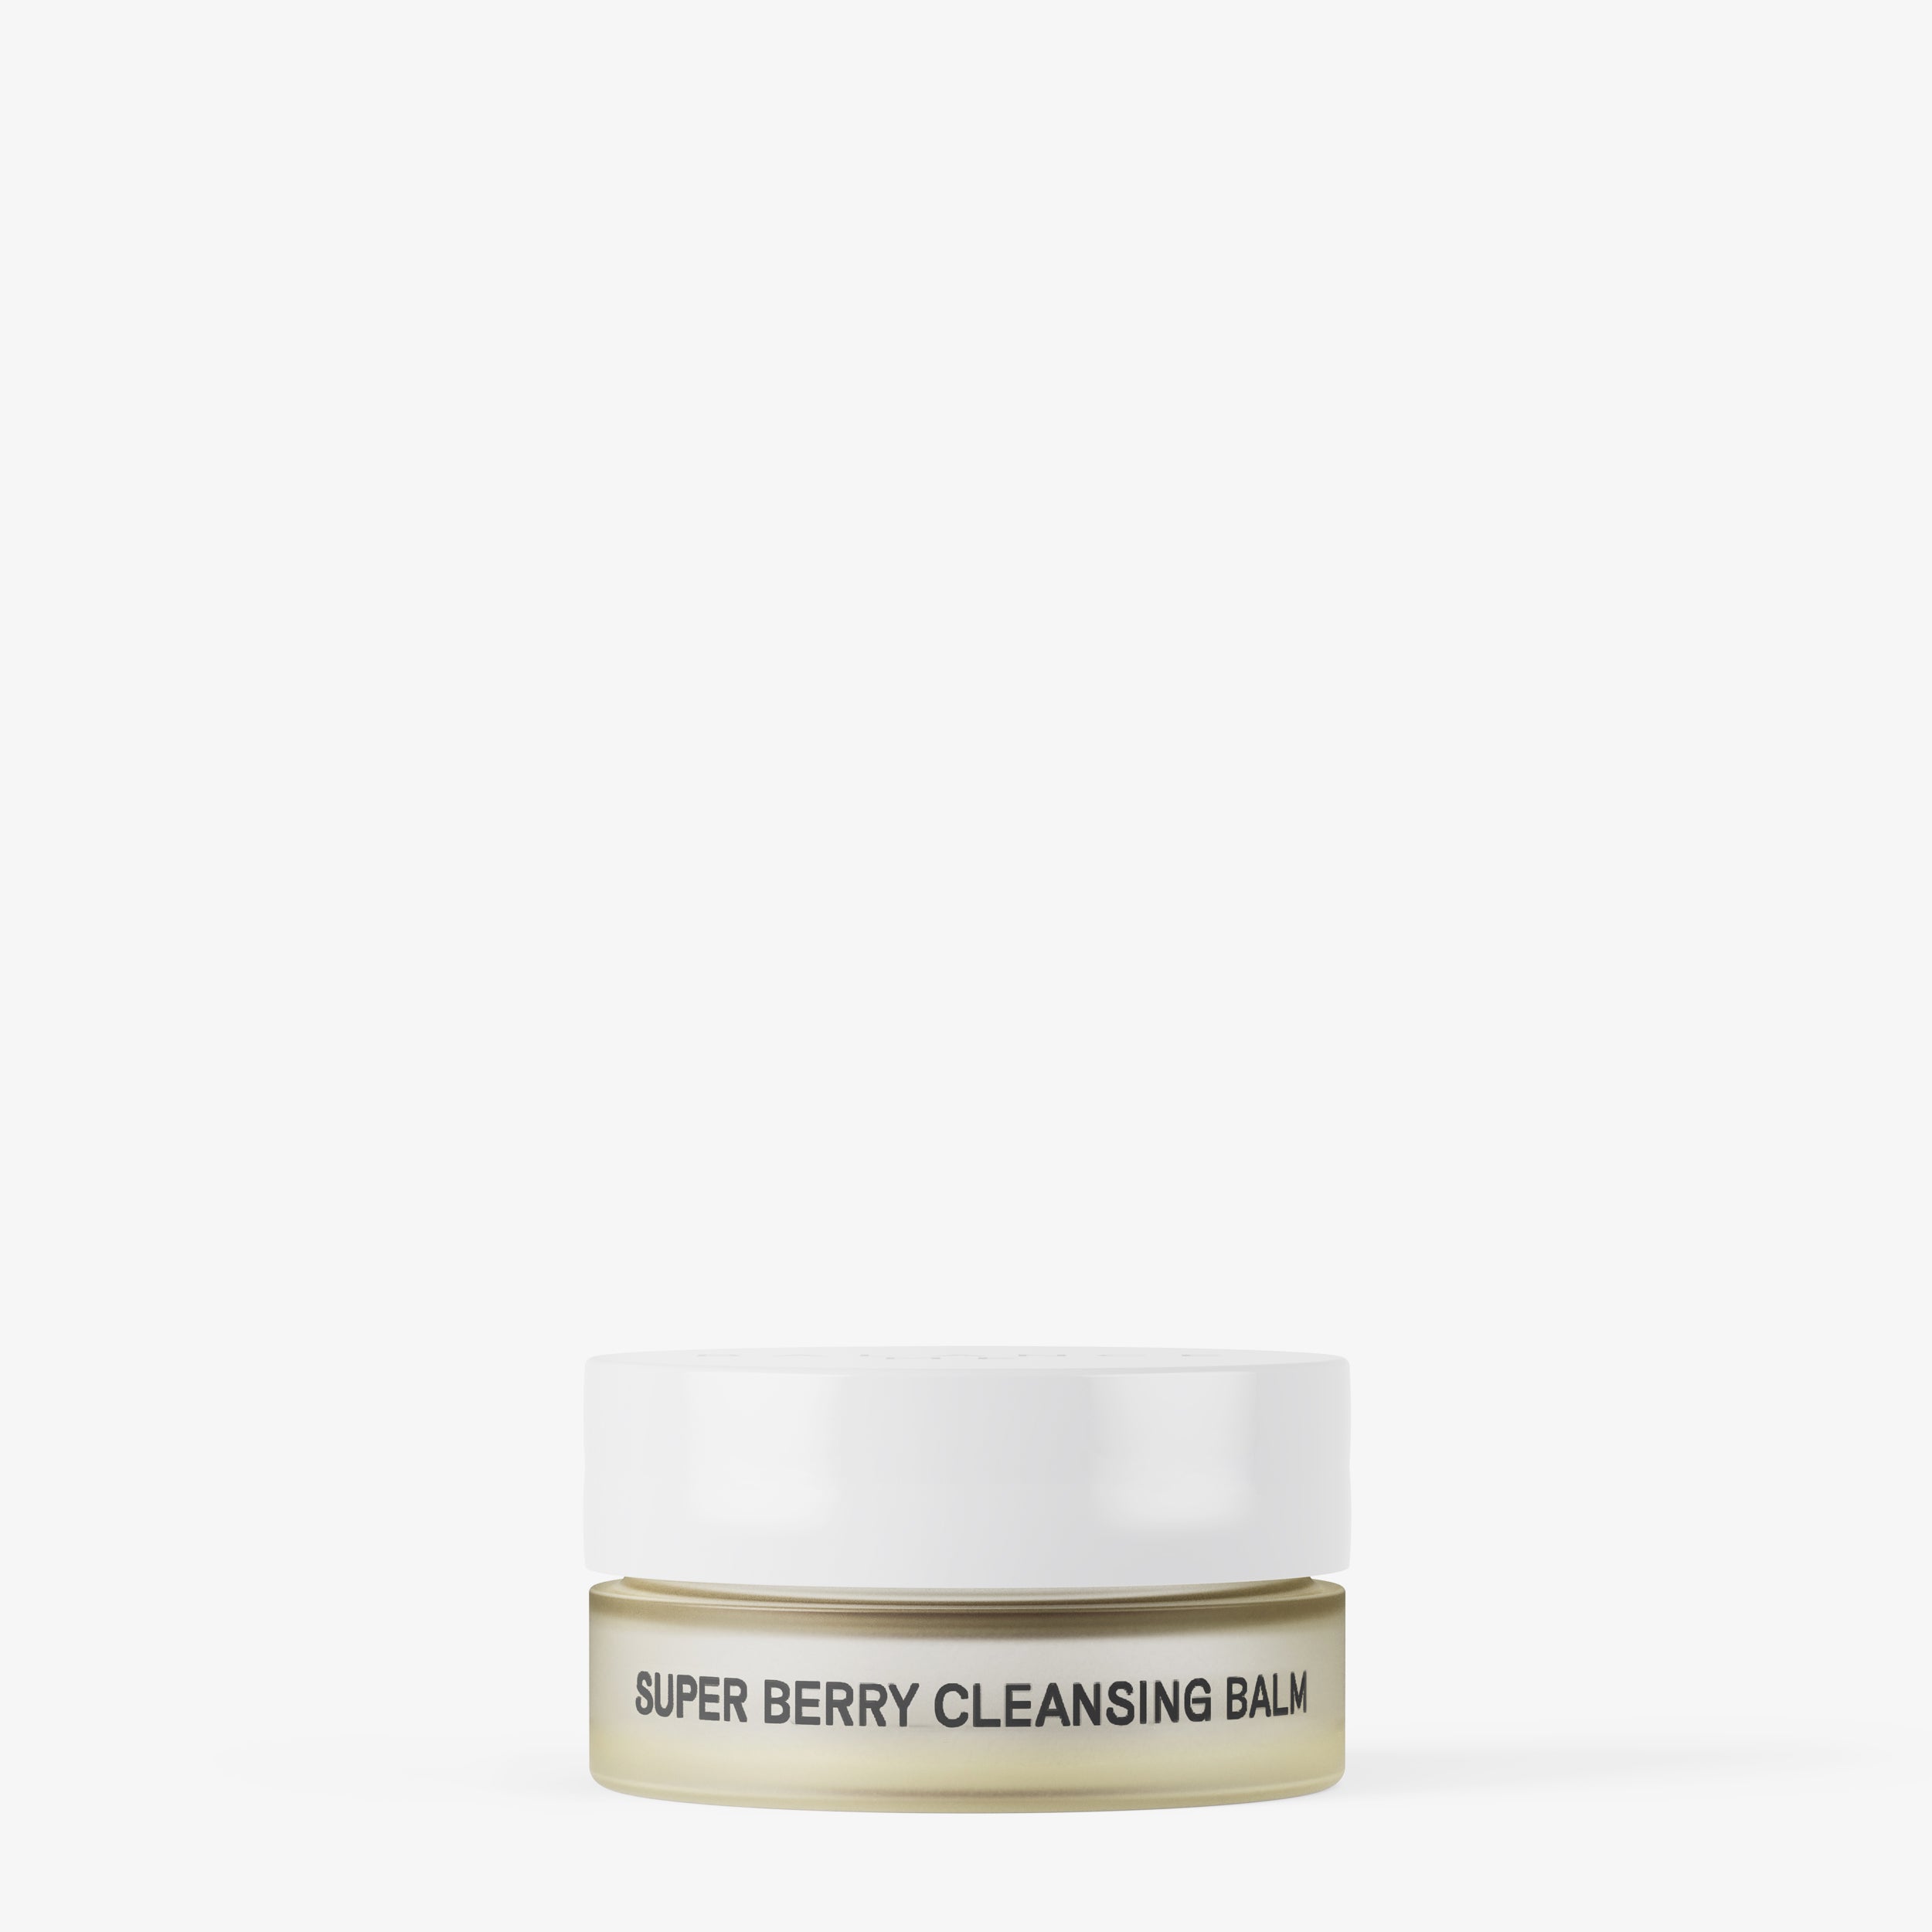 Super Berry Cleansing Balm 5g